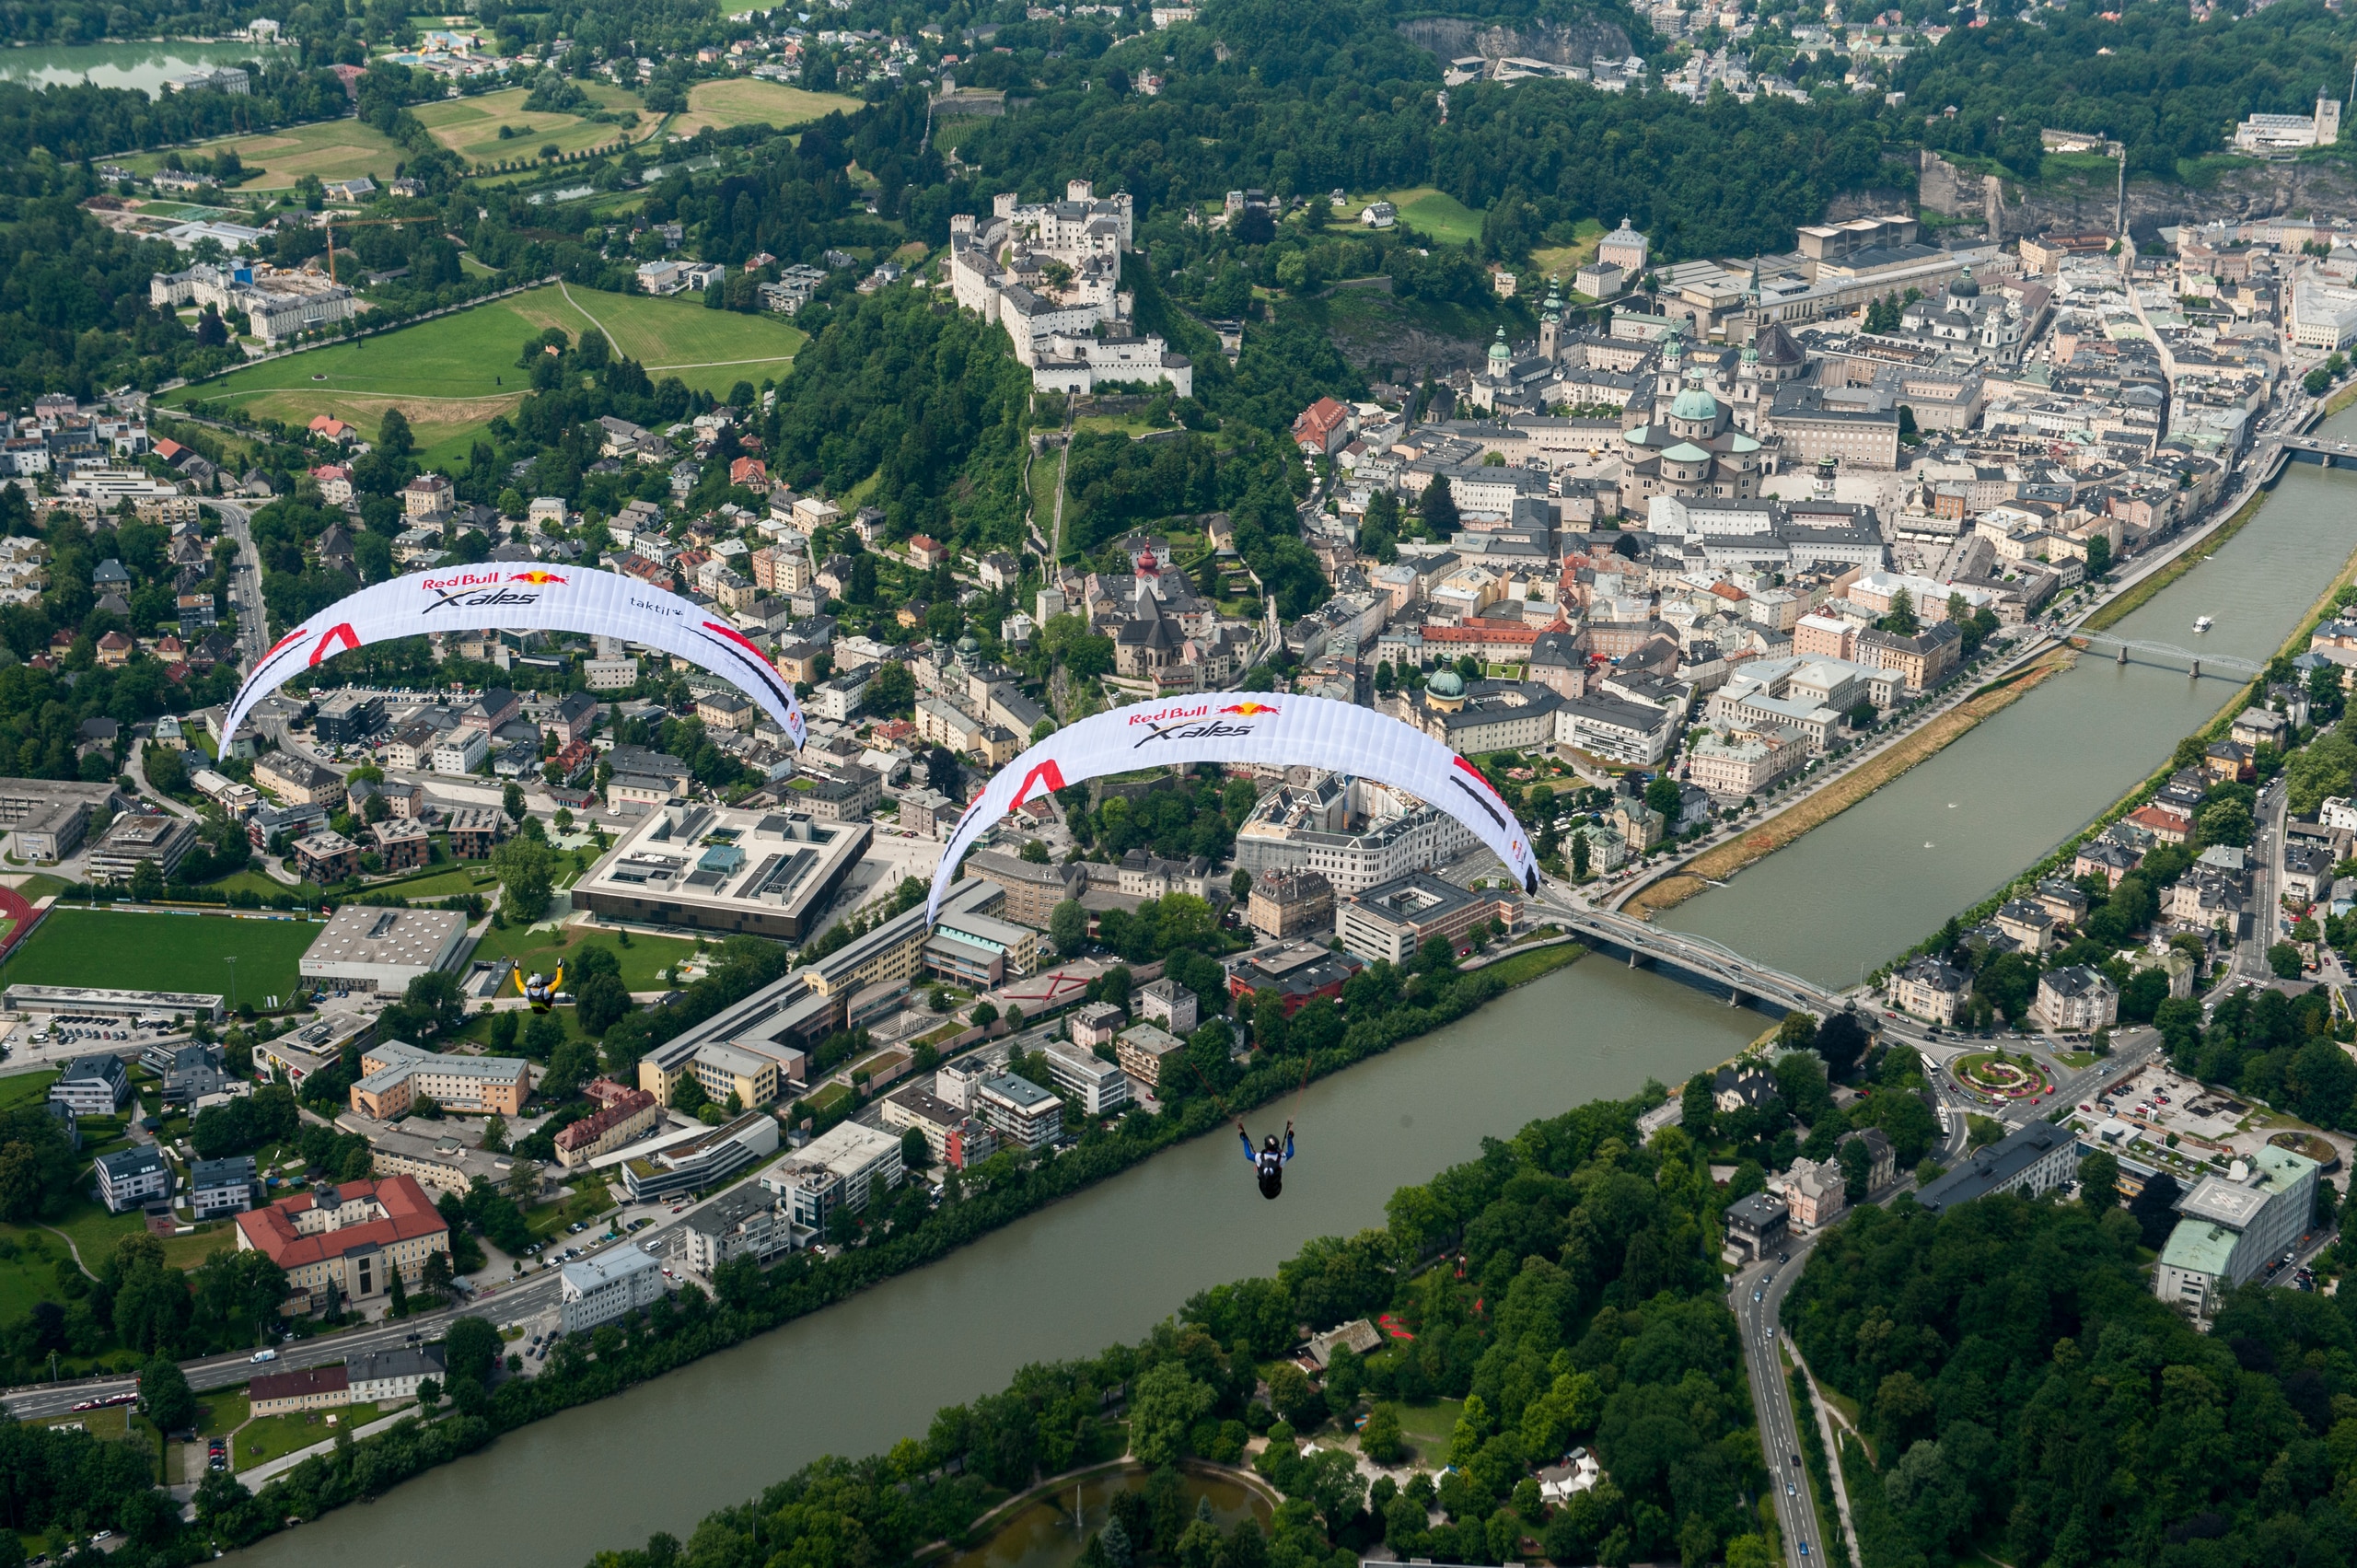 Participant flies during the Red Bull X-Alps preparations in Salzburg, Austria on June 19, 2017